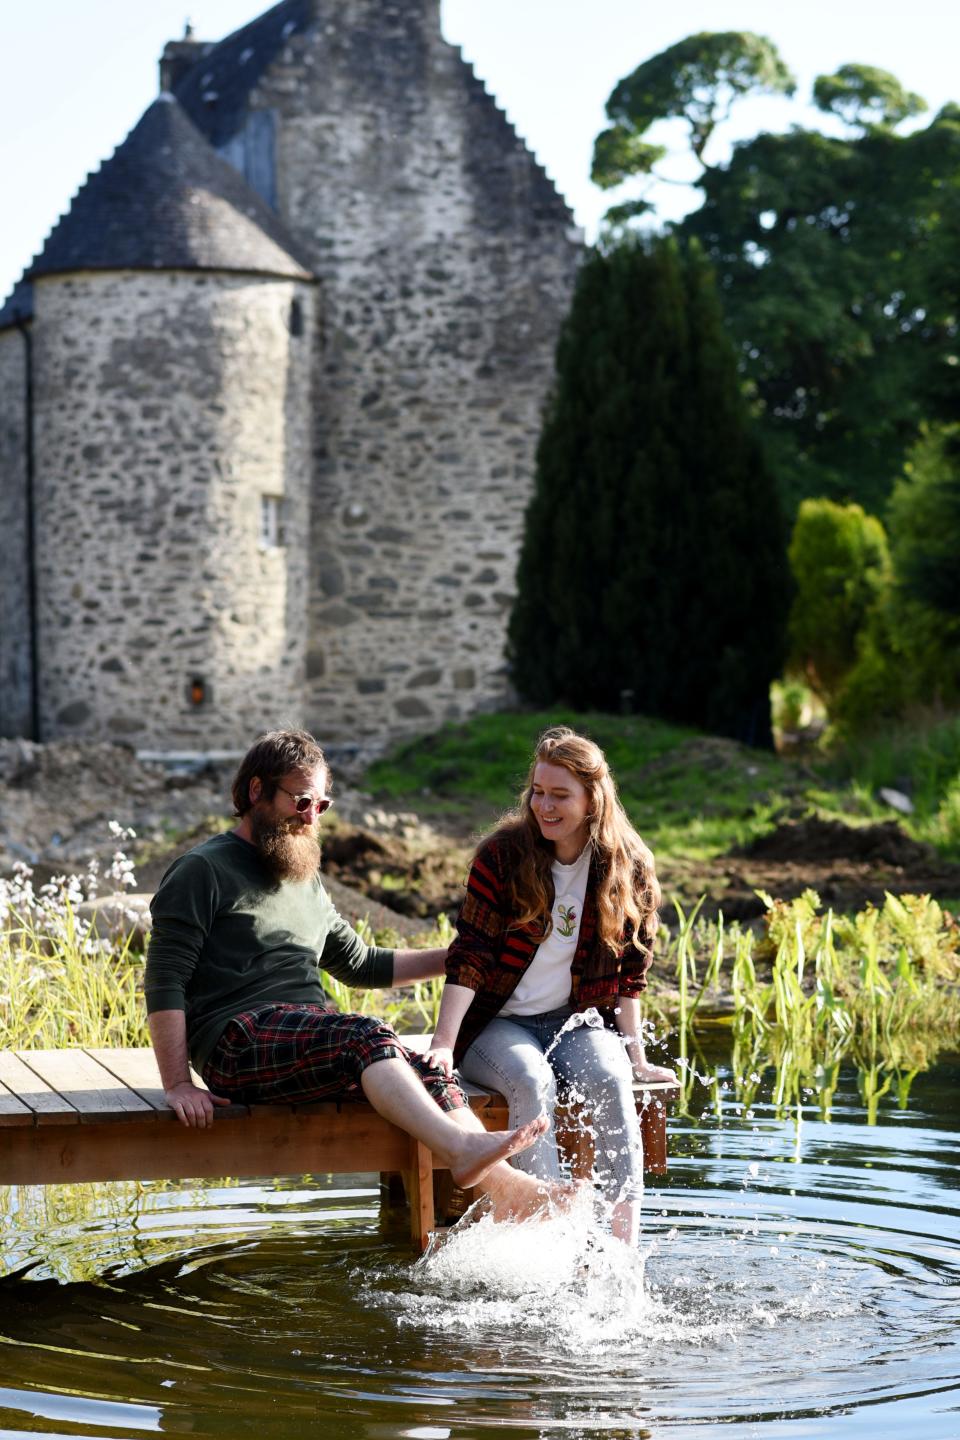 Stef Burgon and Simon Hunt, owners of Kilmartin Castle, are pictured sitting on the dock next to their wild swimming pond.